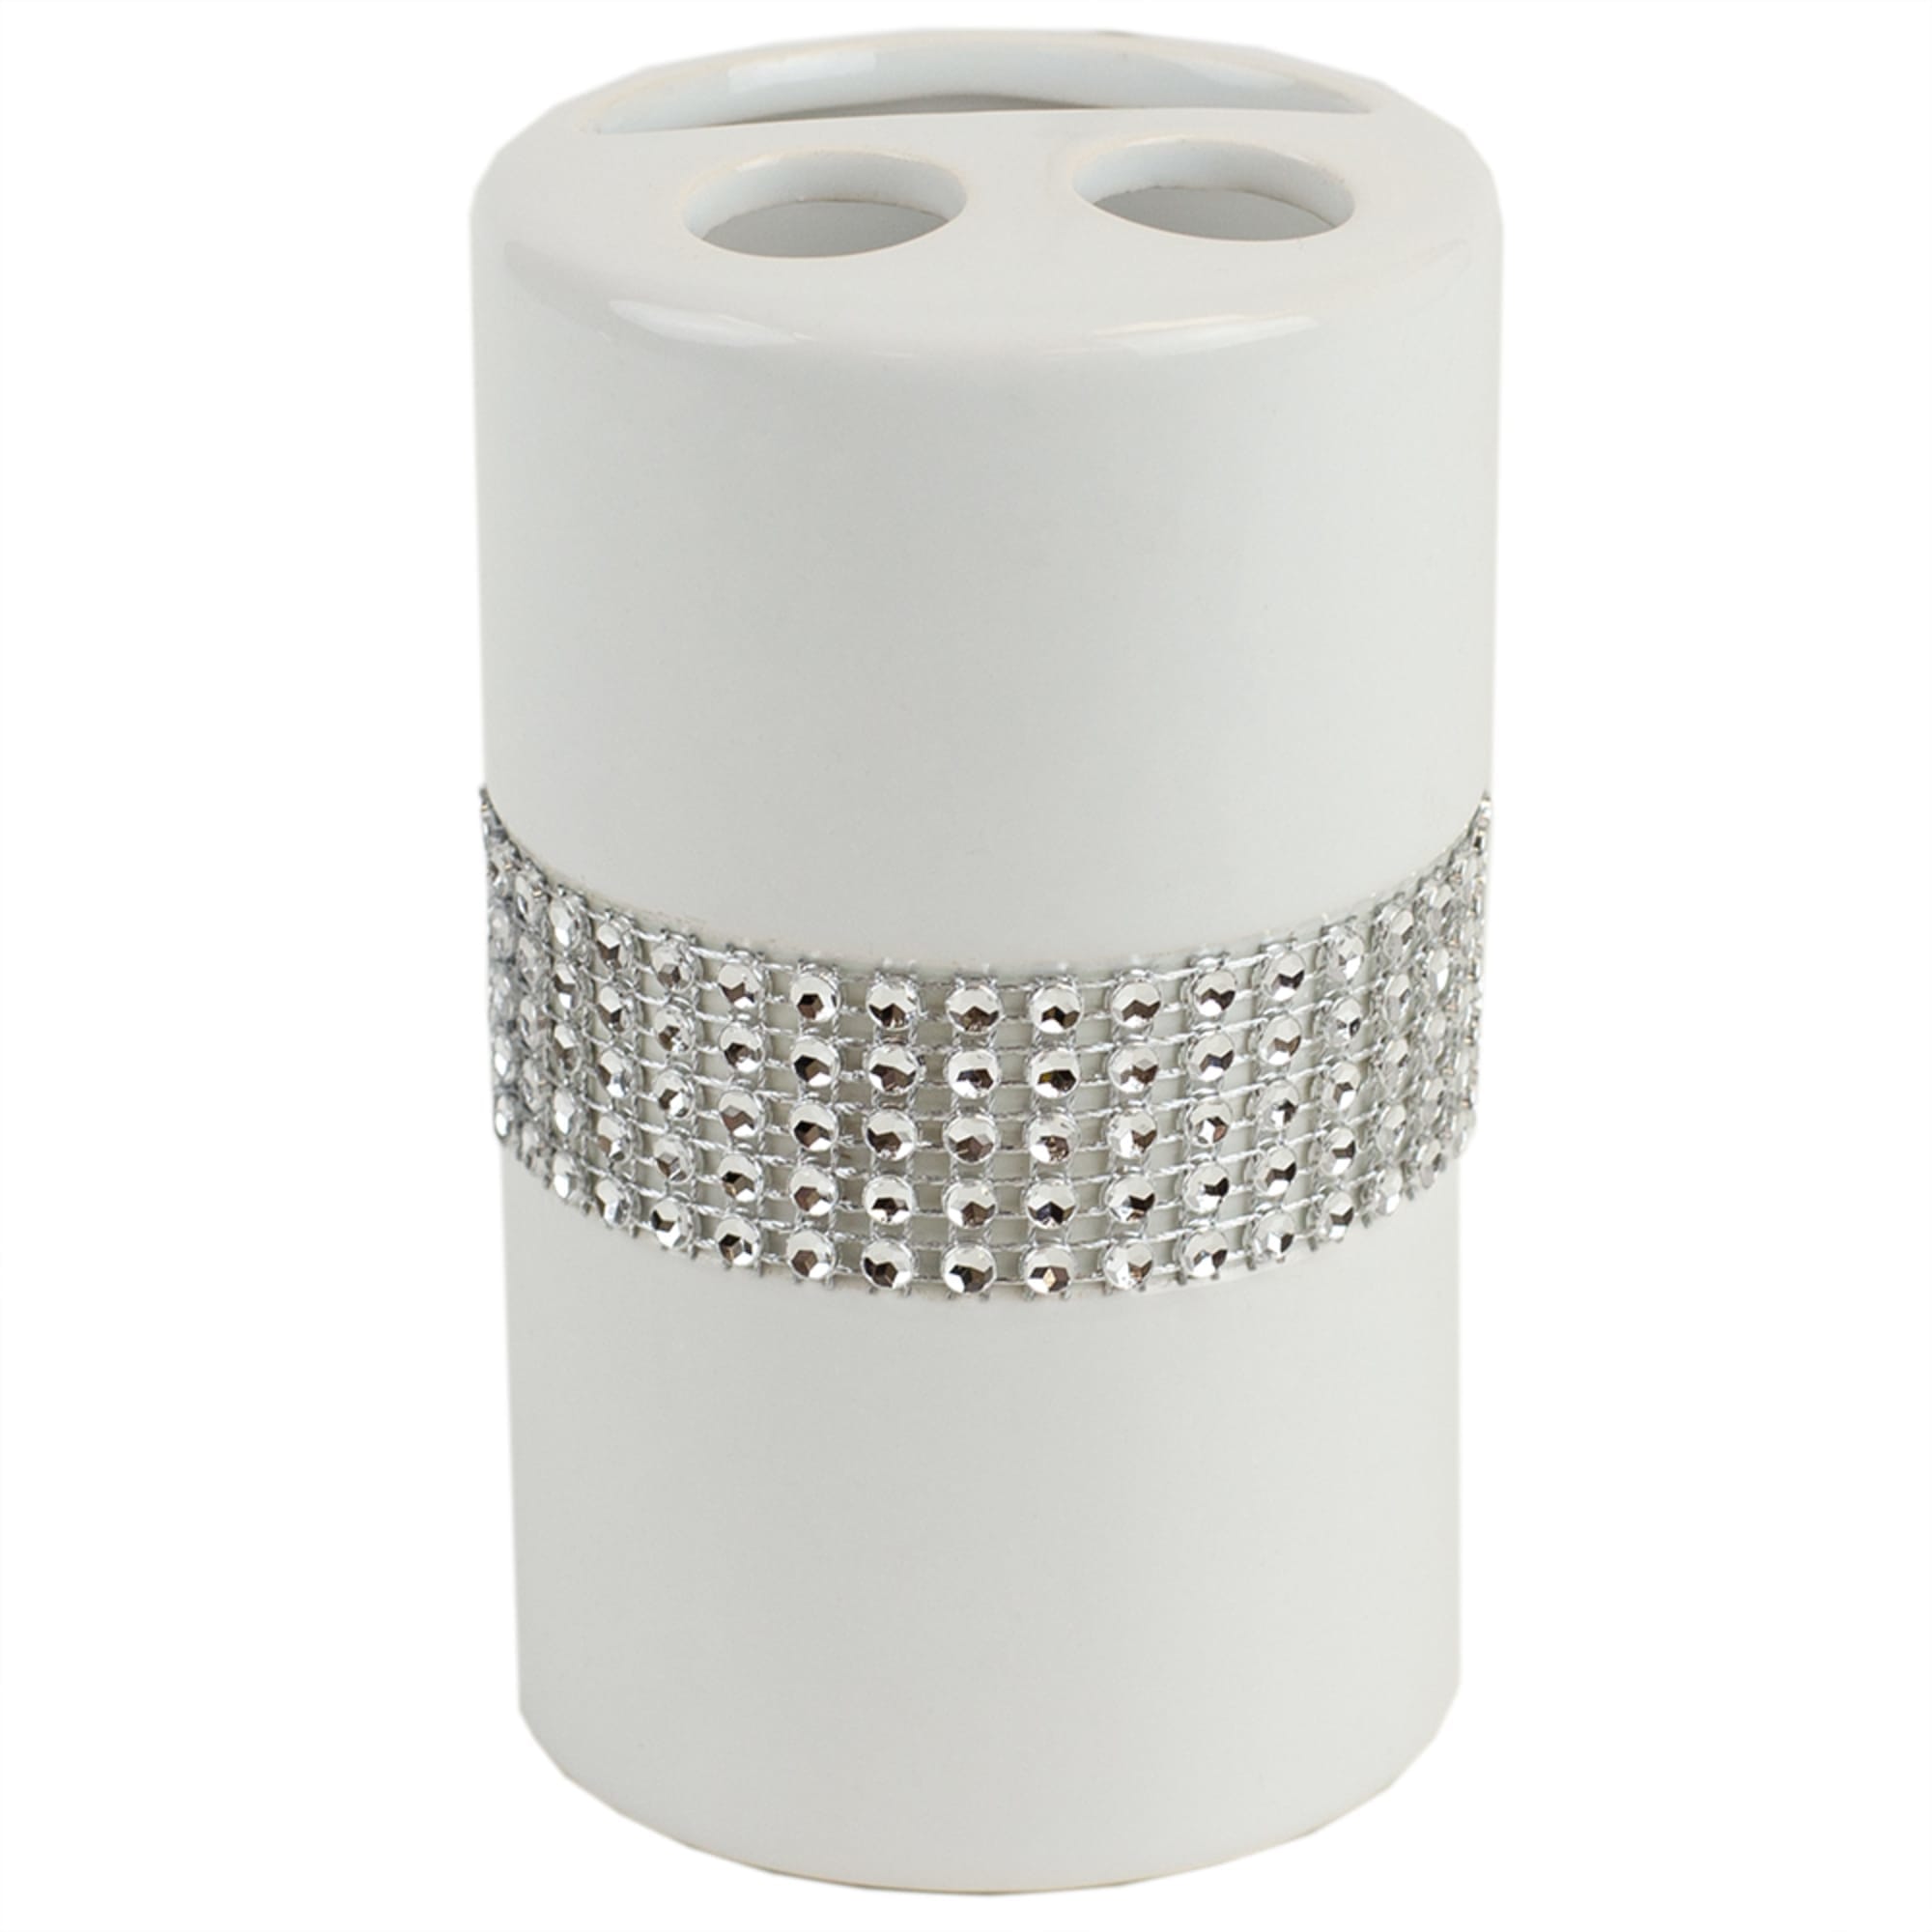 Home Basics 4 Piece Ceramic Luxury Bath Accessory Set with Stunning Sequin Accents, White $10.00 EACH, CASE PACK OF 12